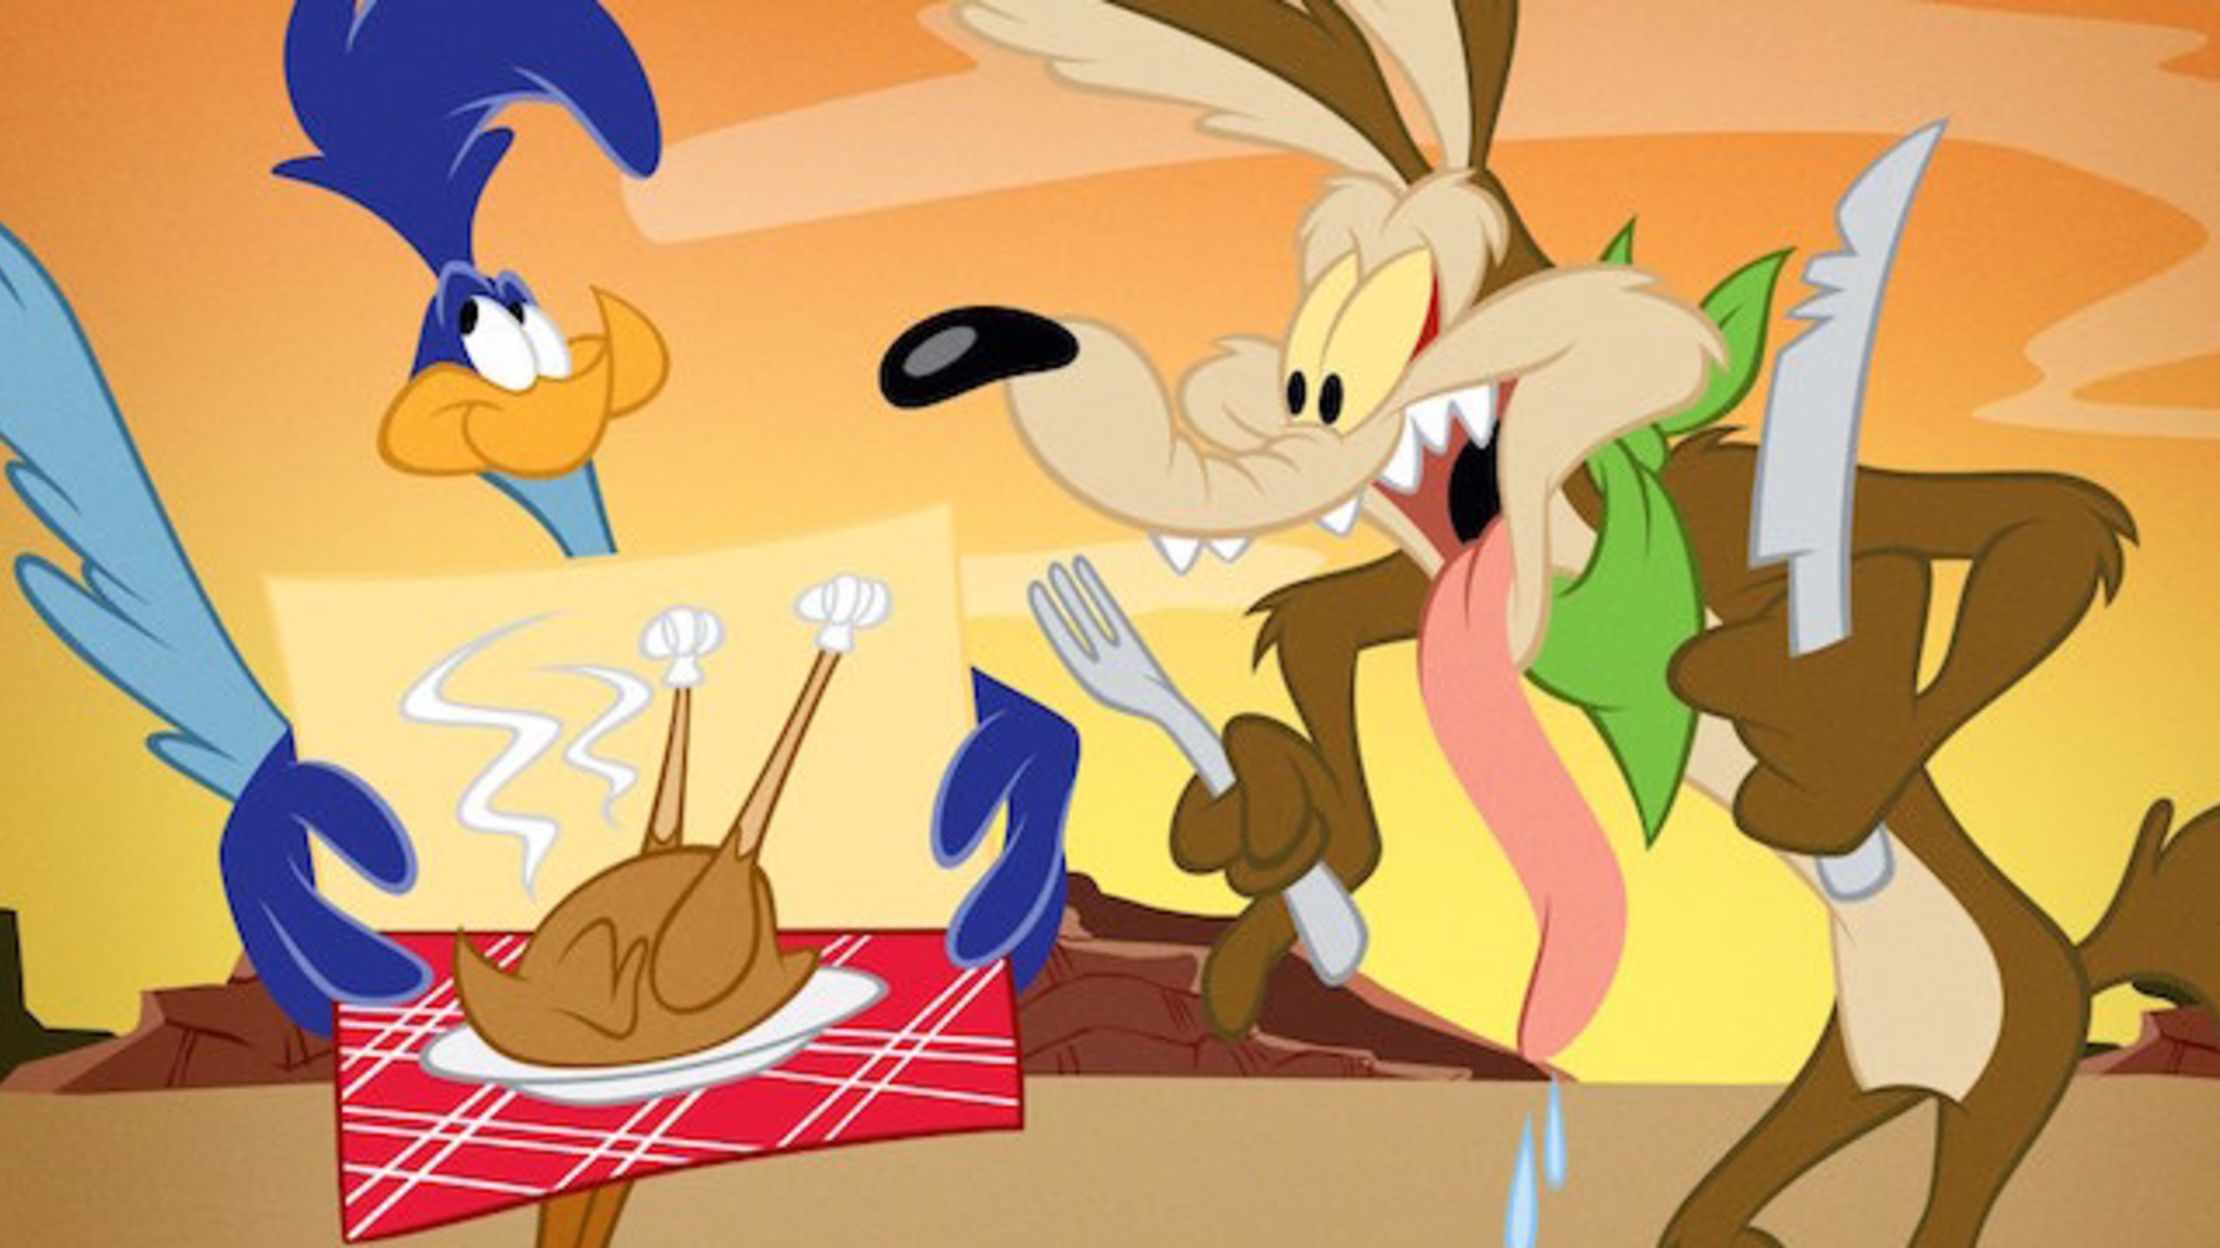 The Surprising Literary Origins of Wile E. Coyote | Mental Floss